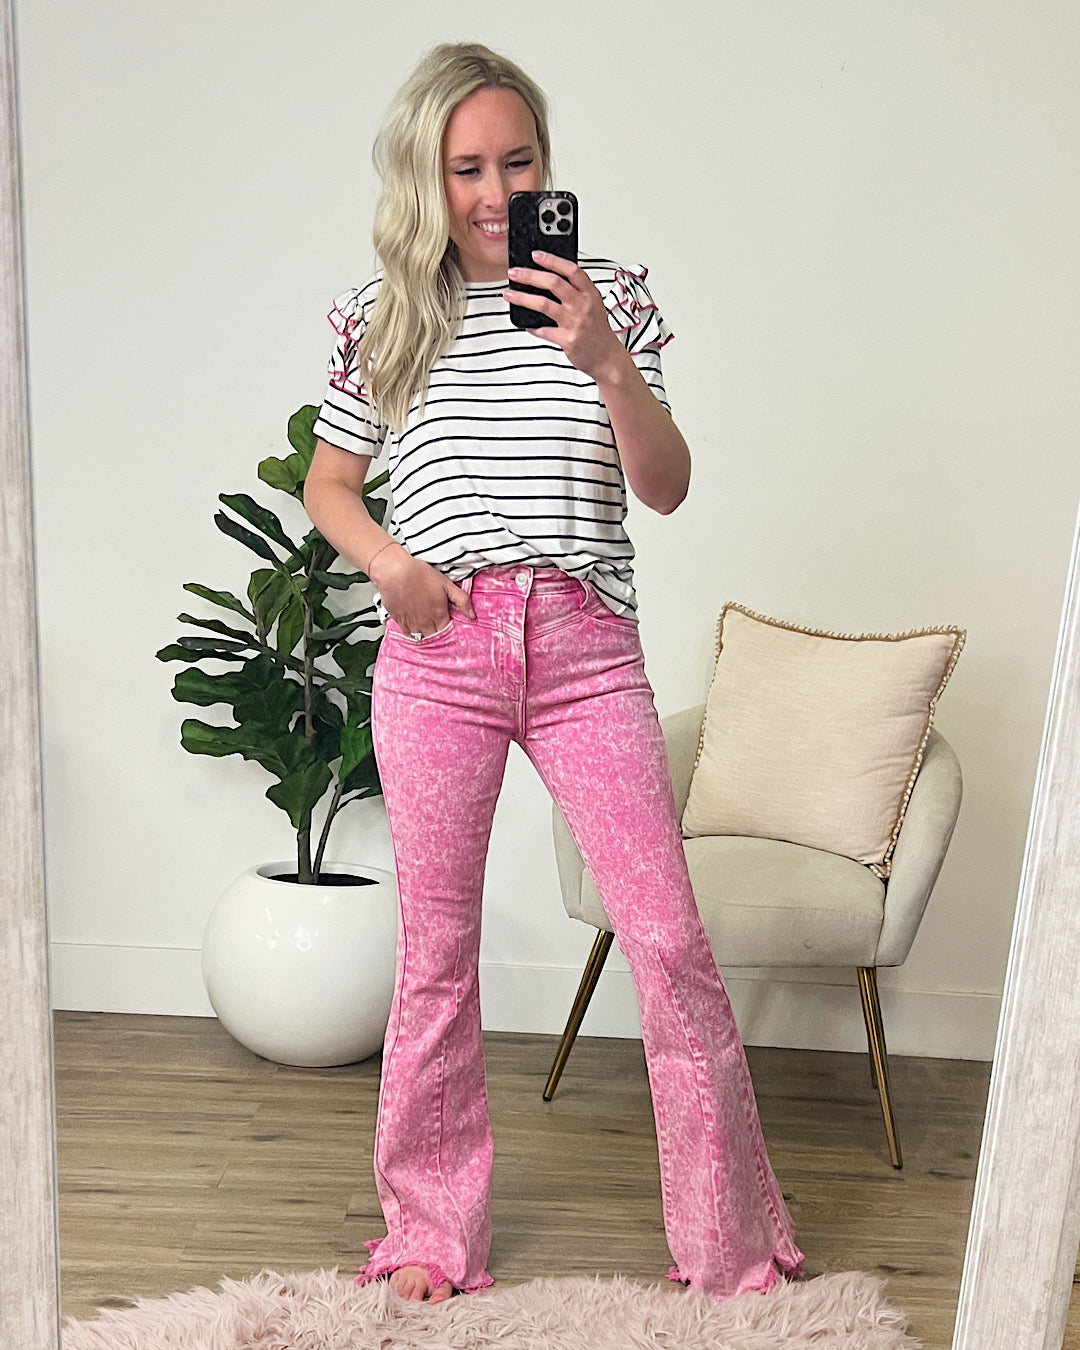 NEW! KanCan Shelby Front Seam Flare Jeans - Pink Acid Wash  KanCan   